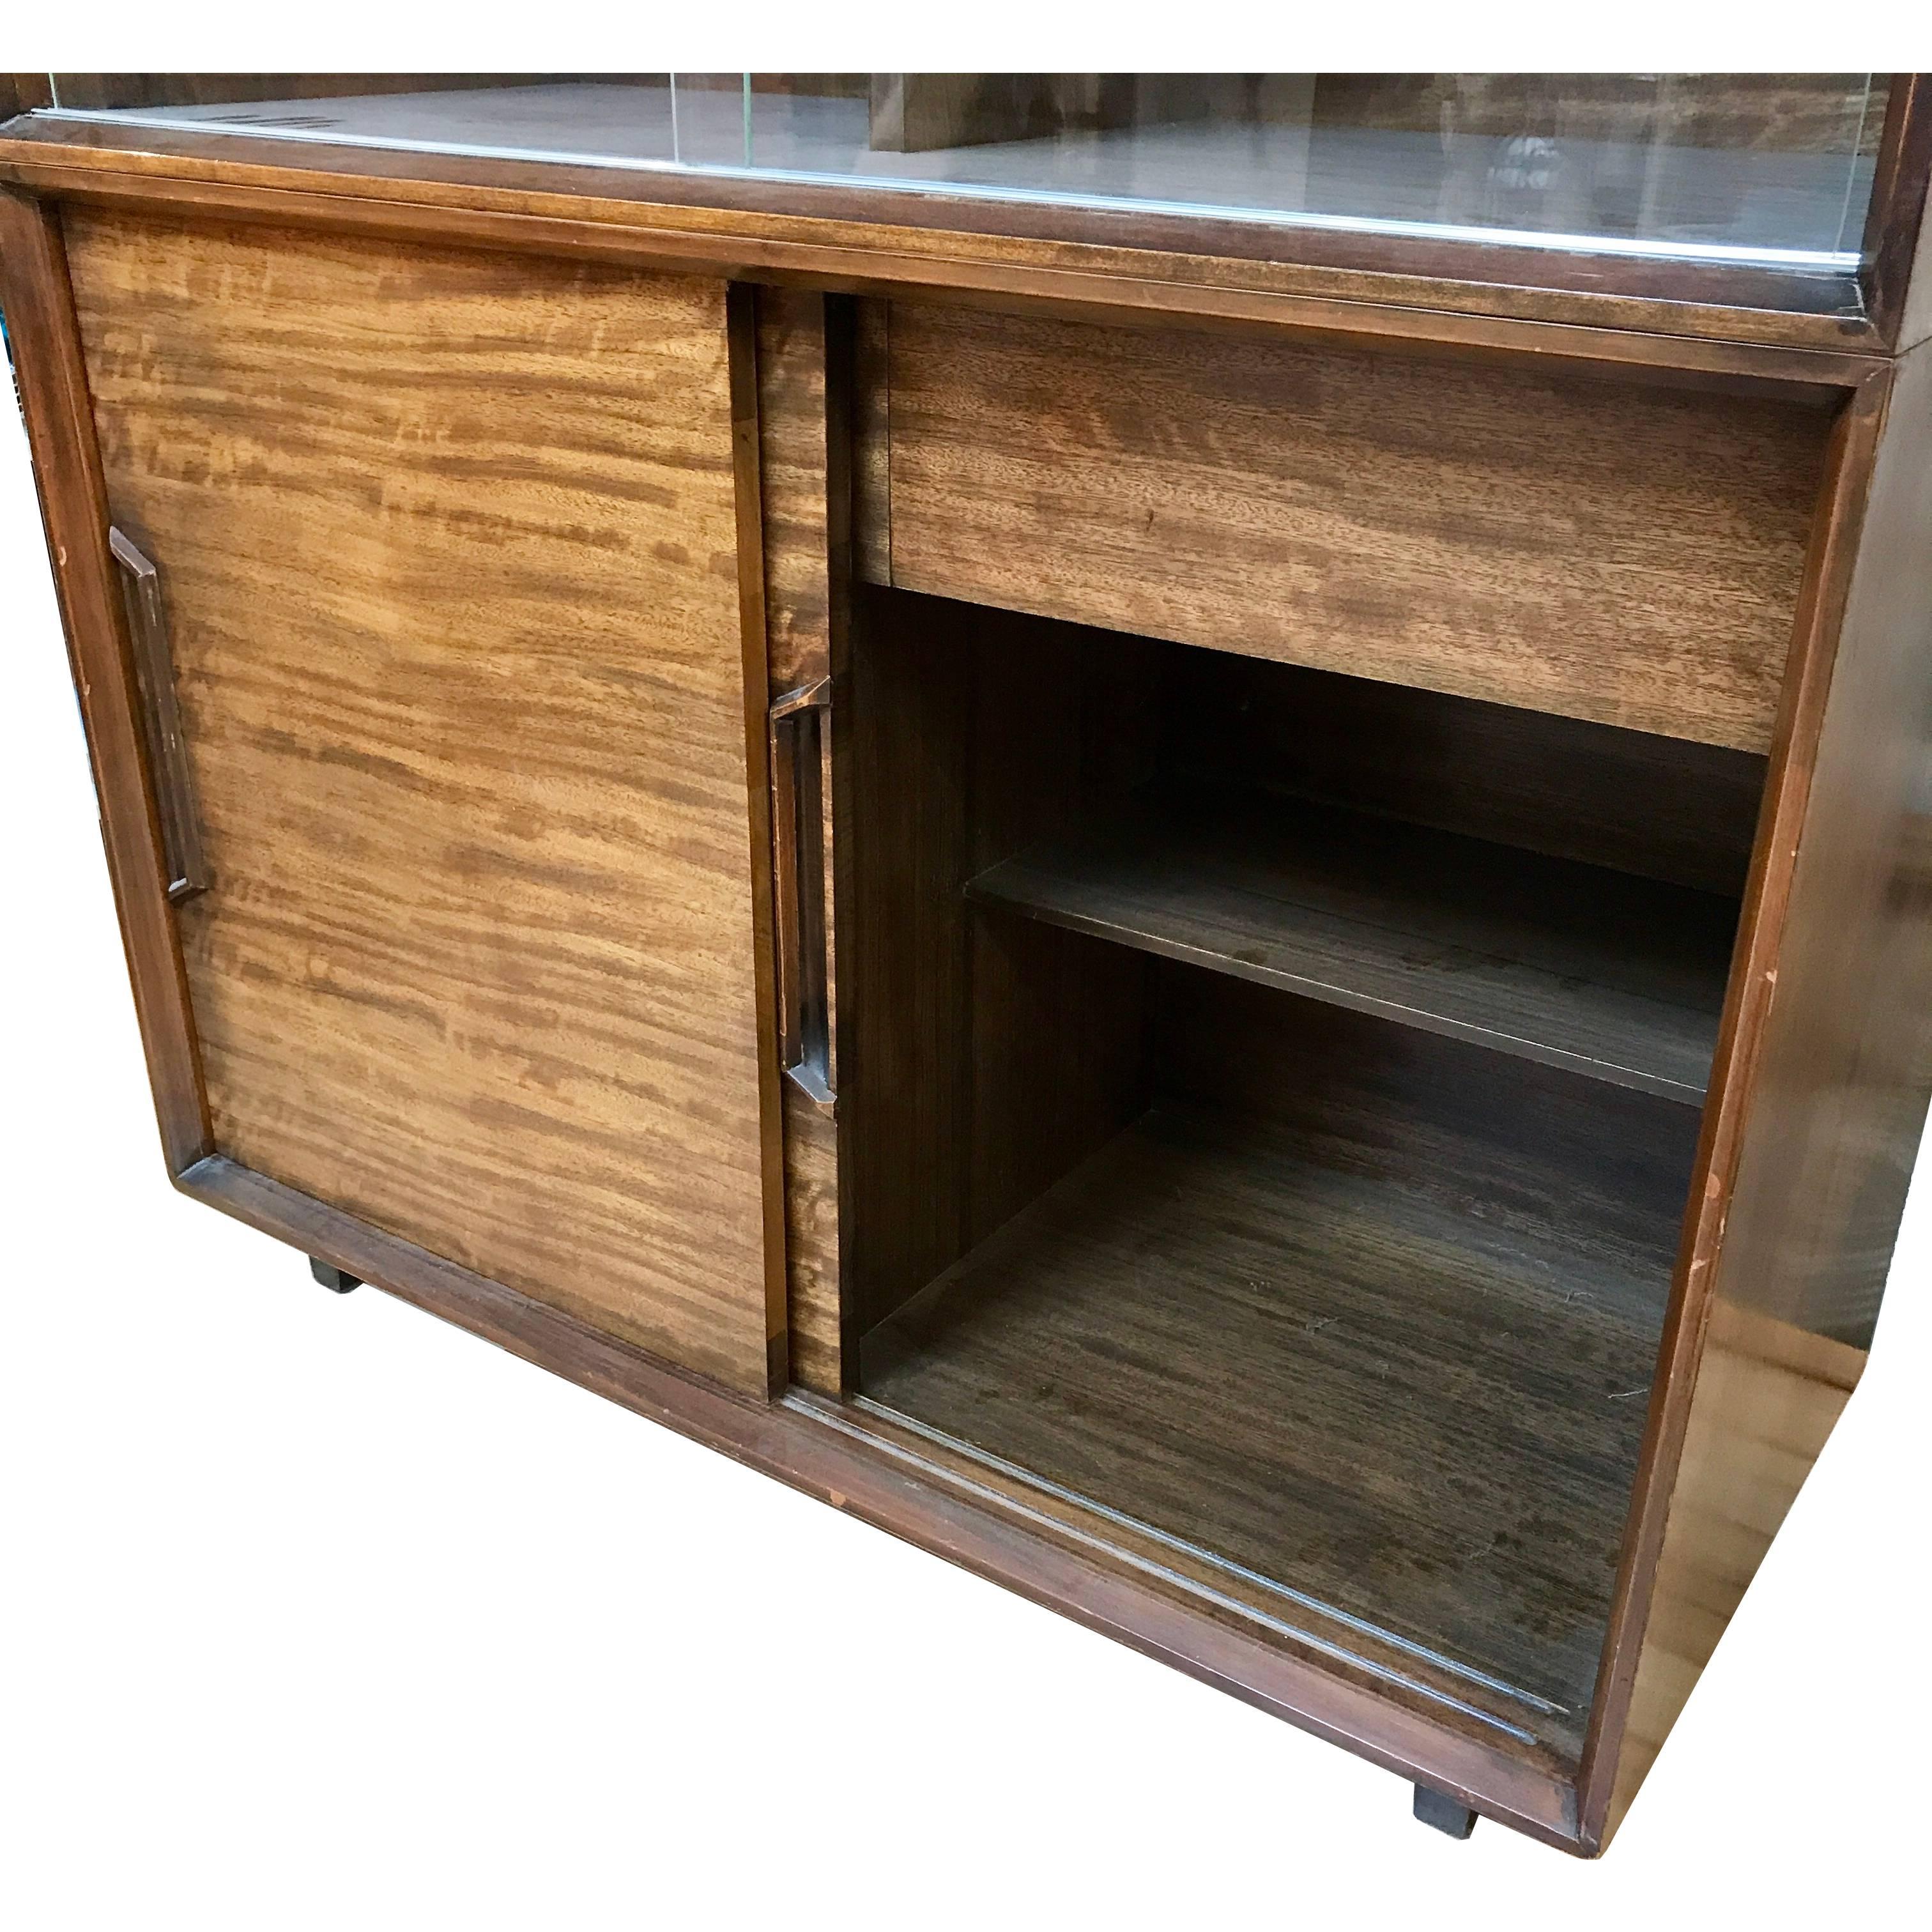 1950s Milo Baughman for Drexel Perspective Mindoro Wood China Hutch In Good Condition For Sale In Sacramento, CA